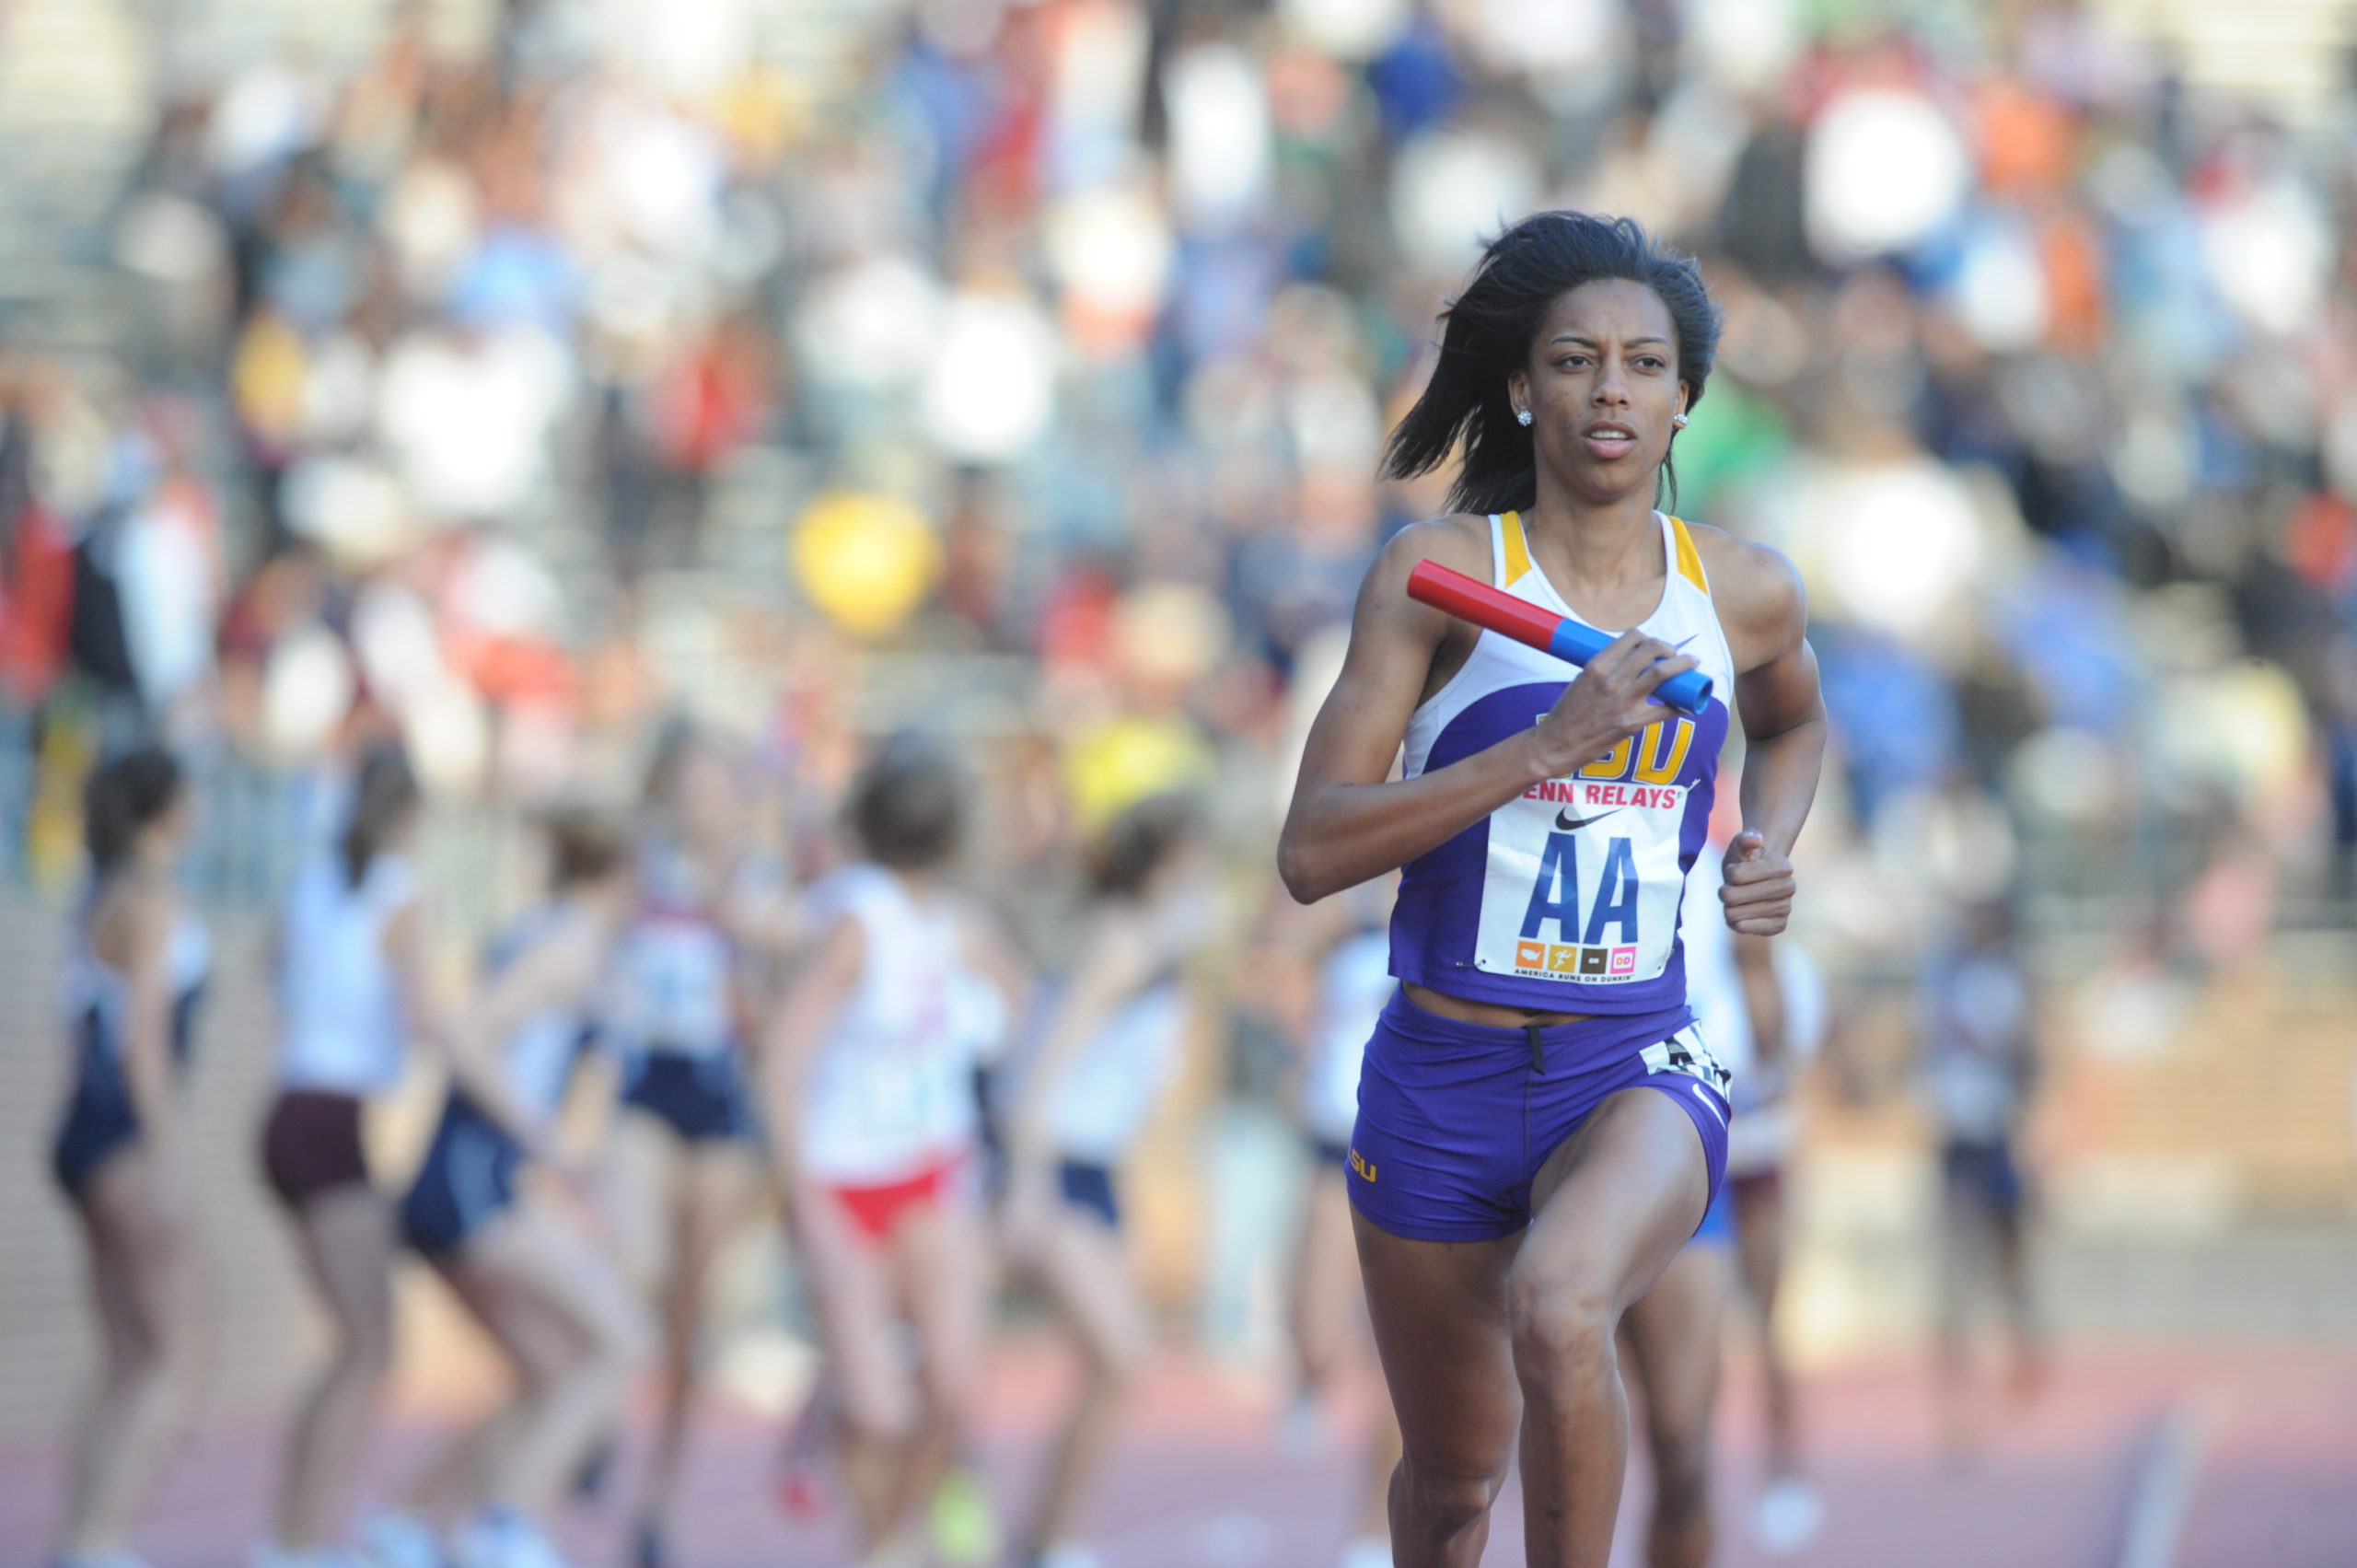 PENN RELAYS TO BE EXCLUSIVELY STREAMED ON FLOSPORTS THROUGH 2025